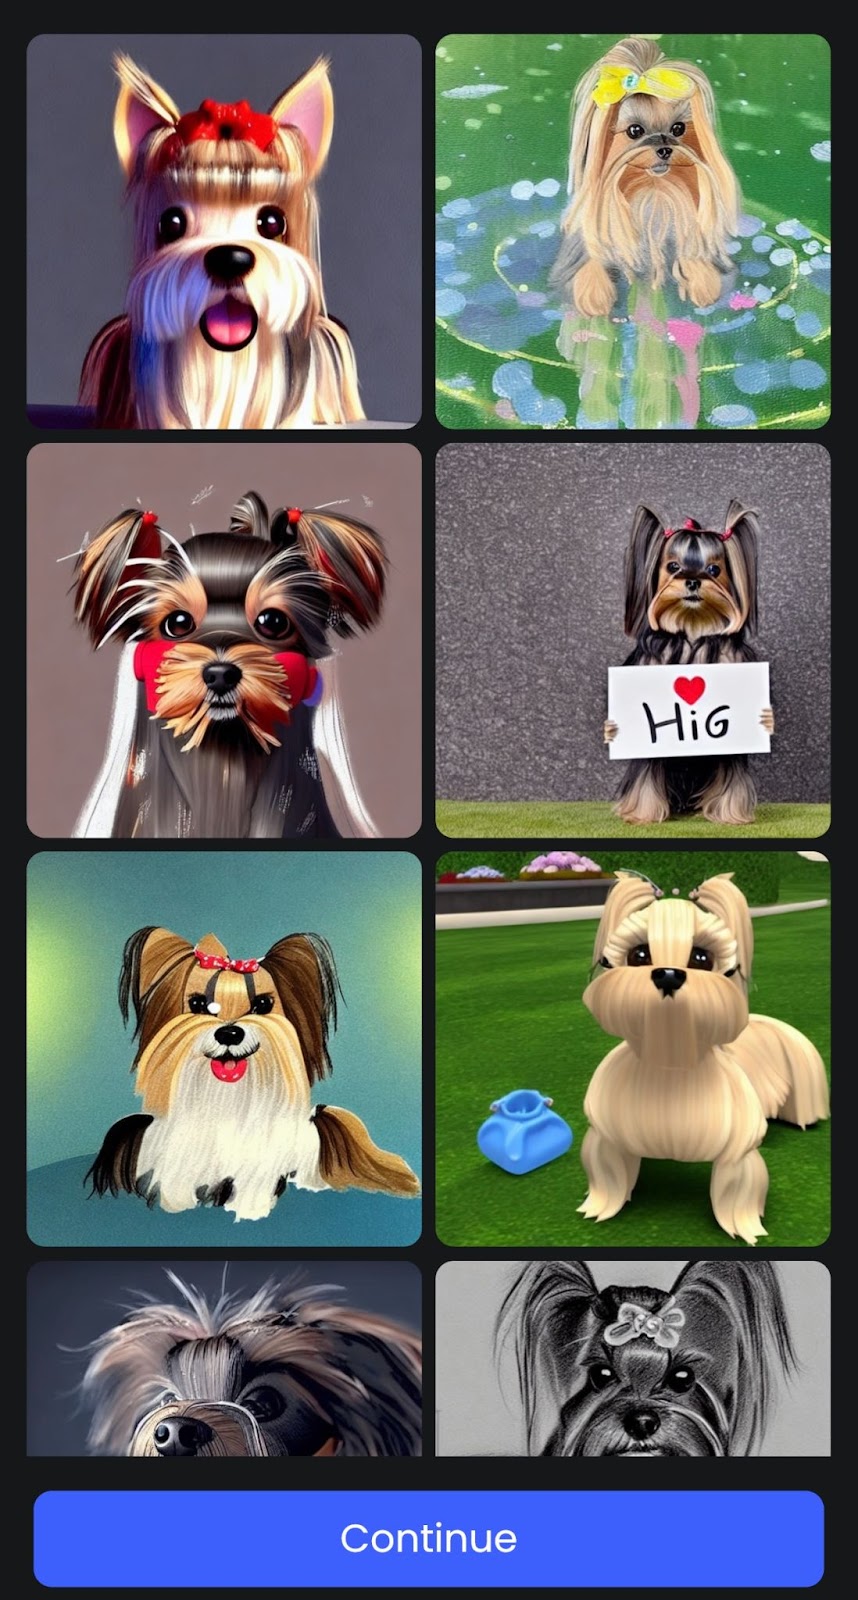 Choose from your favorites from the generated pictures.